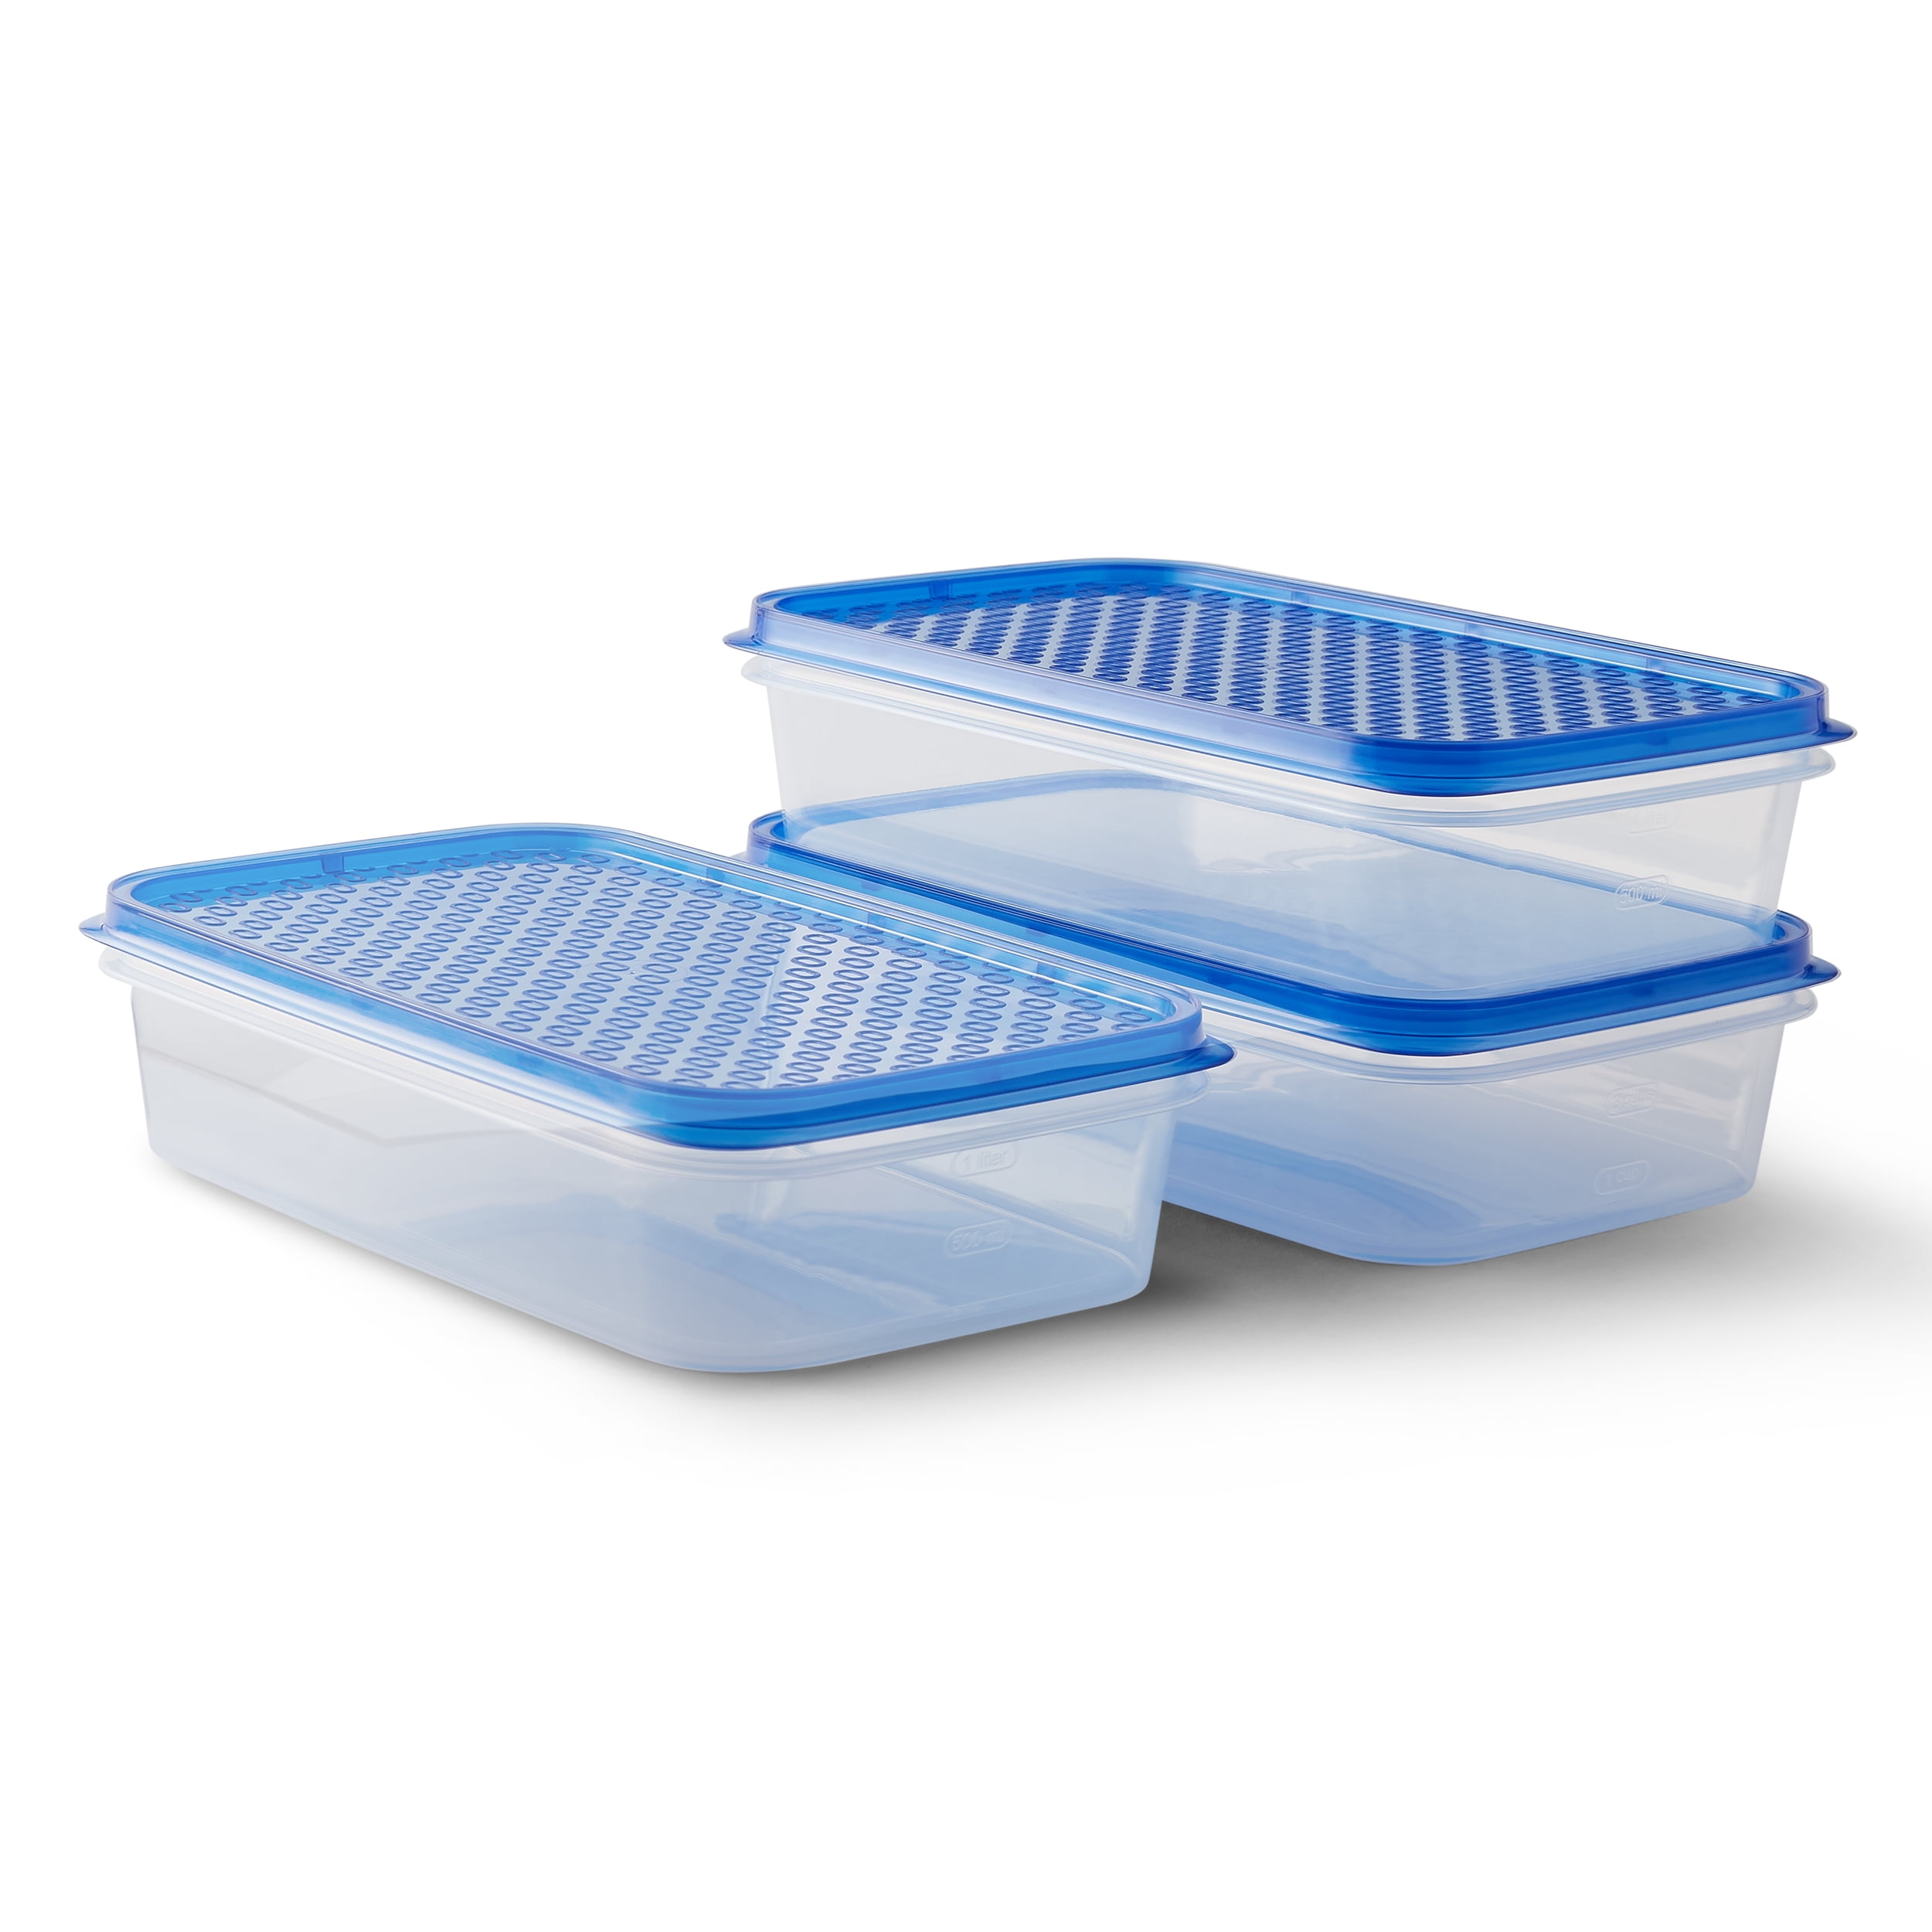 10 Pcs Always Fresh Plastic Food Storage Containers Set With Color Coded Lids